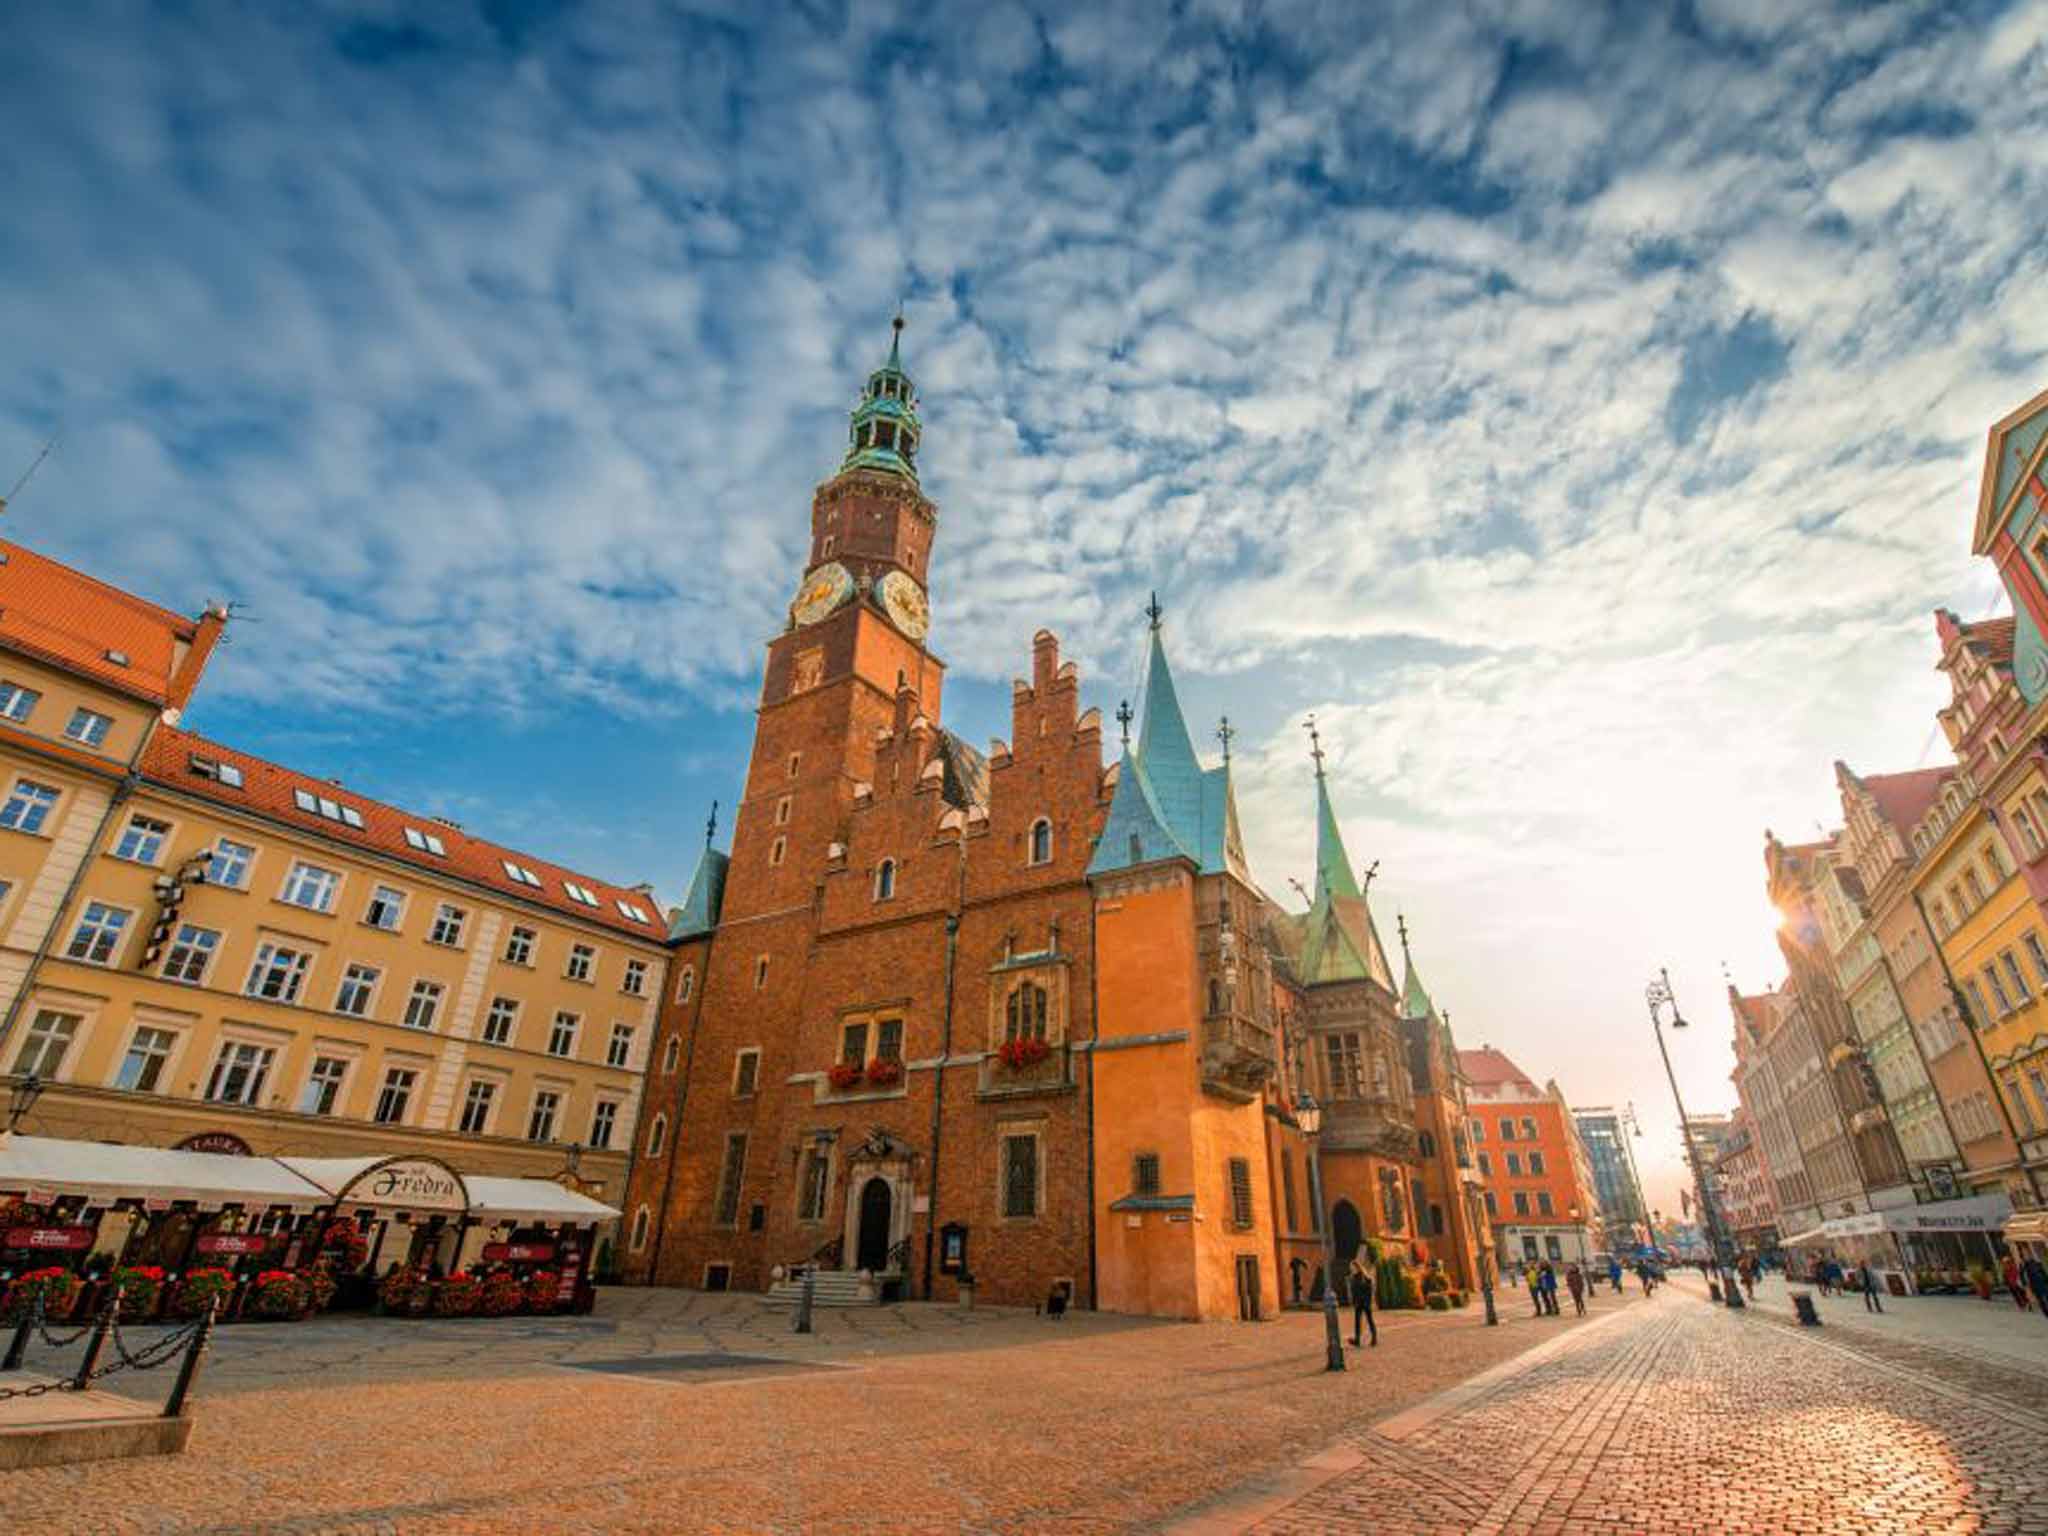 Square deal: Rynek is at the heart of Wroclaw